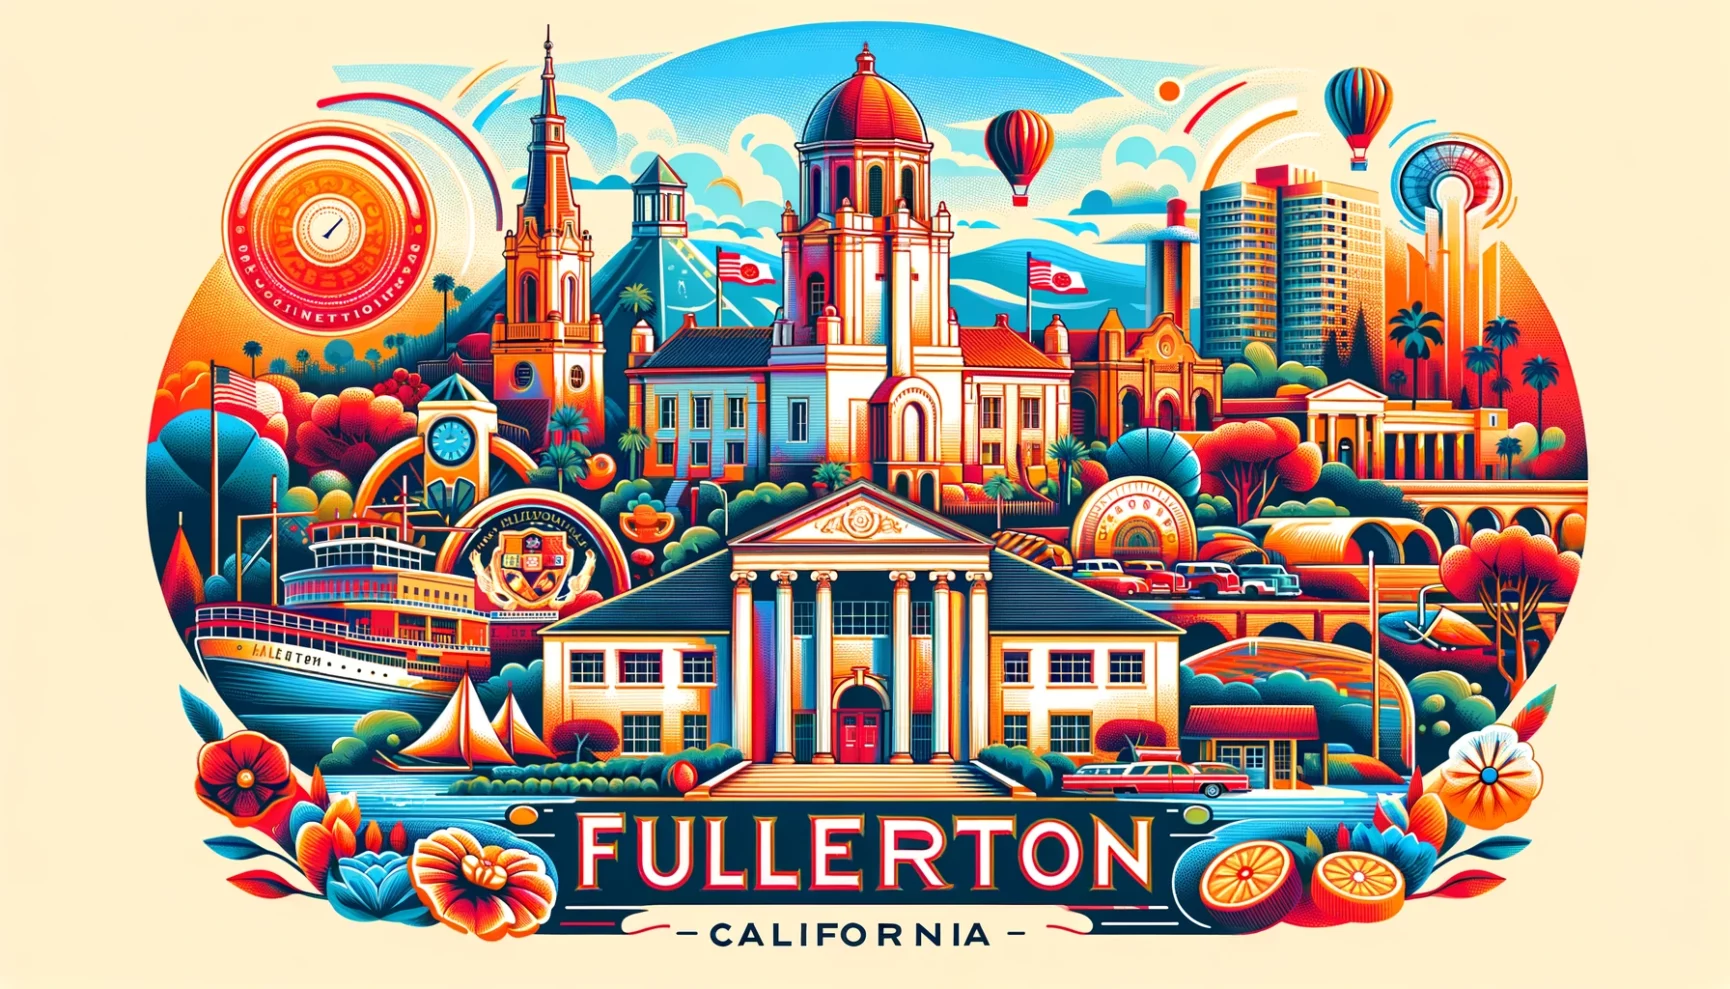 Colorful, stylized illustration featuring landmarks and symbols representing fullerton, california.